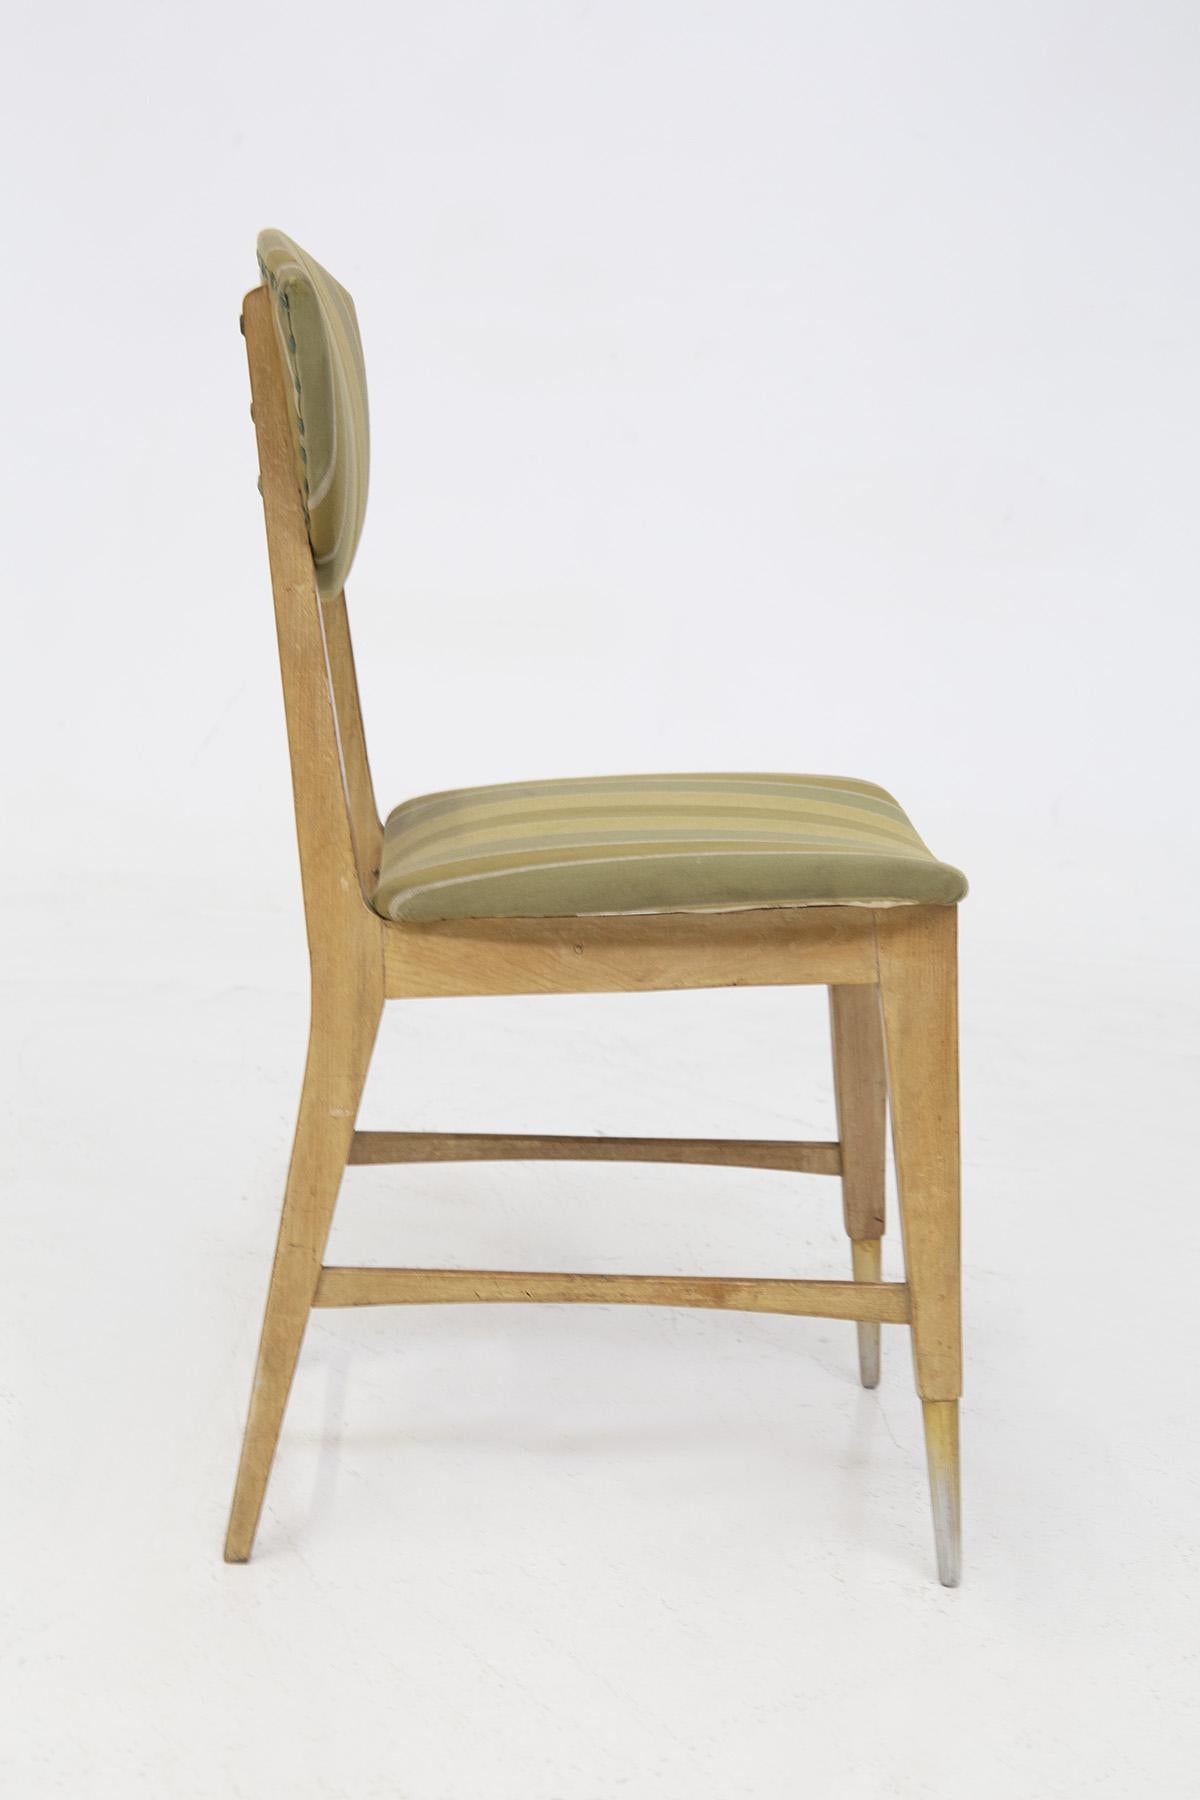 Melchiorre Bega Vintage Wood and Fabric Chairs For Sale 4